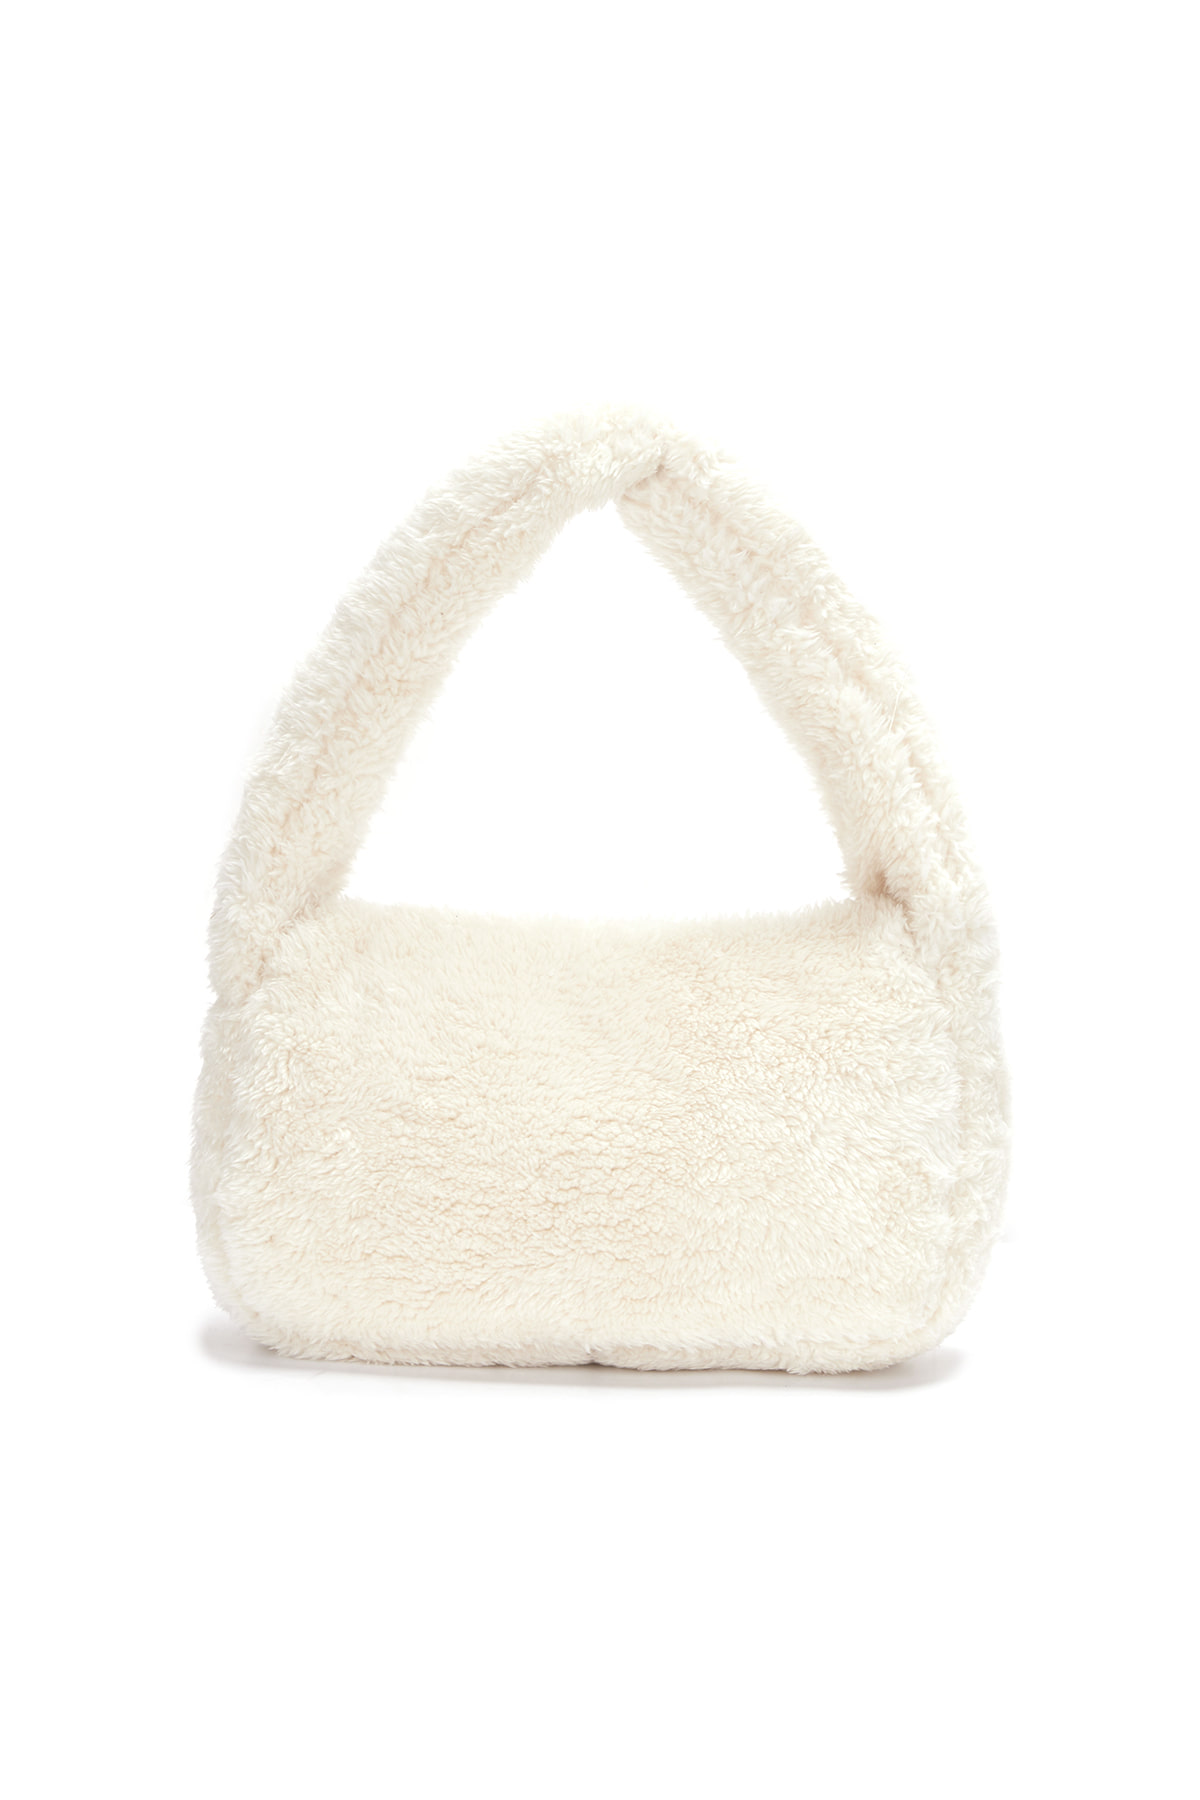 PLUFFY TOTE BAG IN IVORY